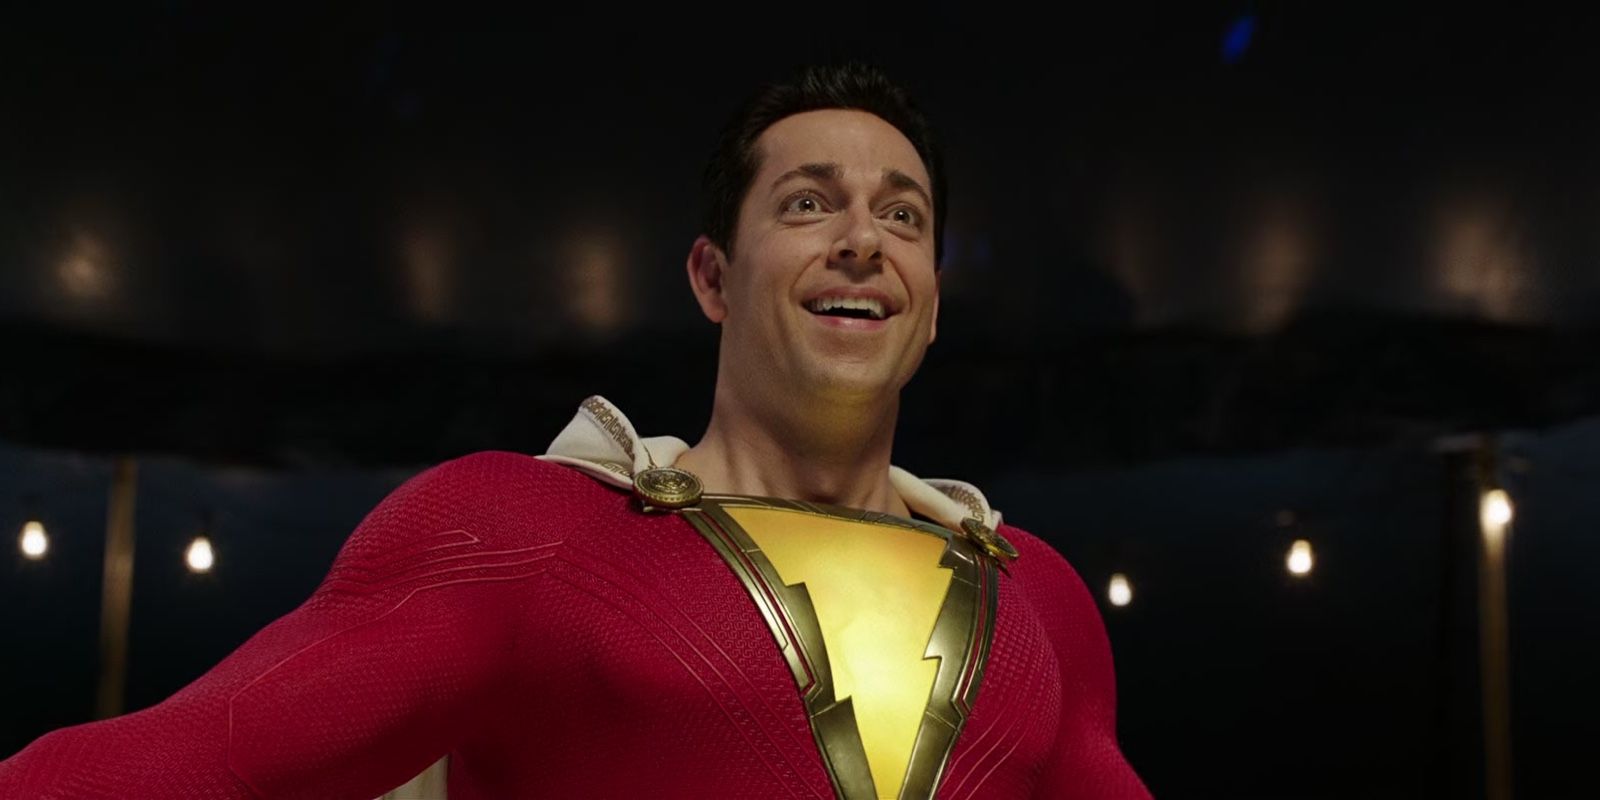 Shazam 2 is Bigger Than The First Movie According to the Director